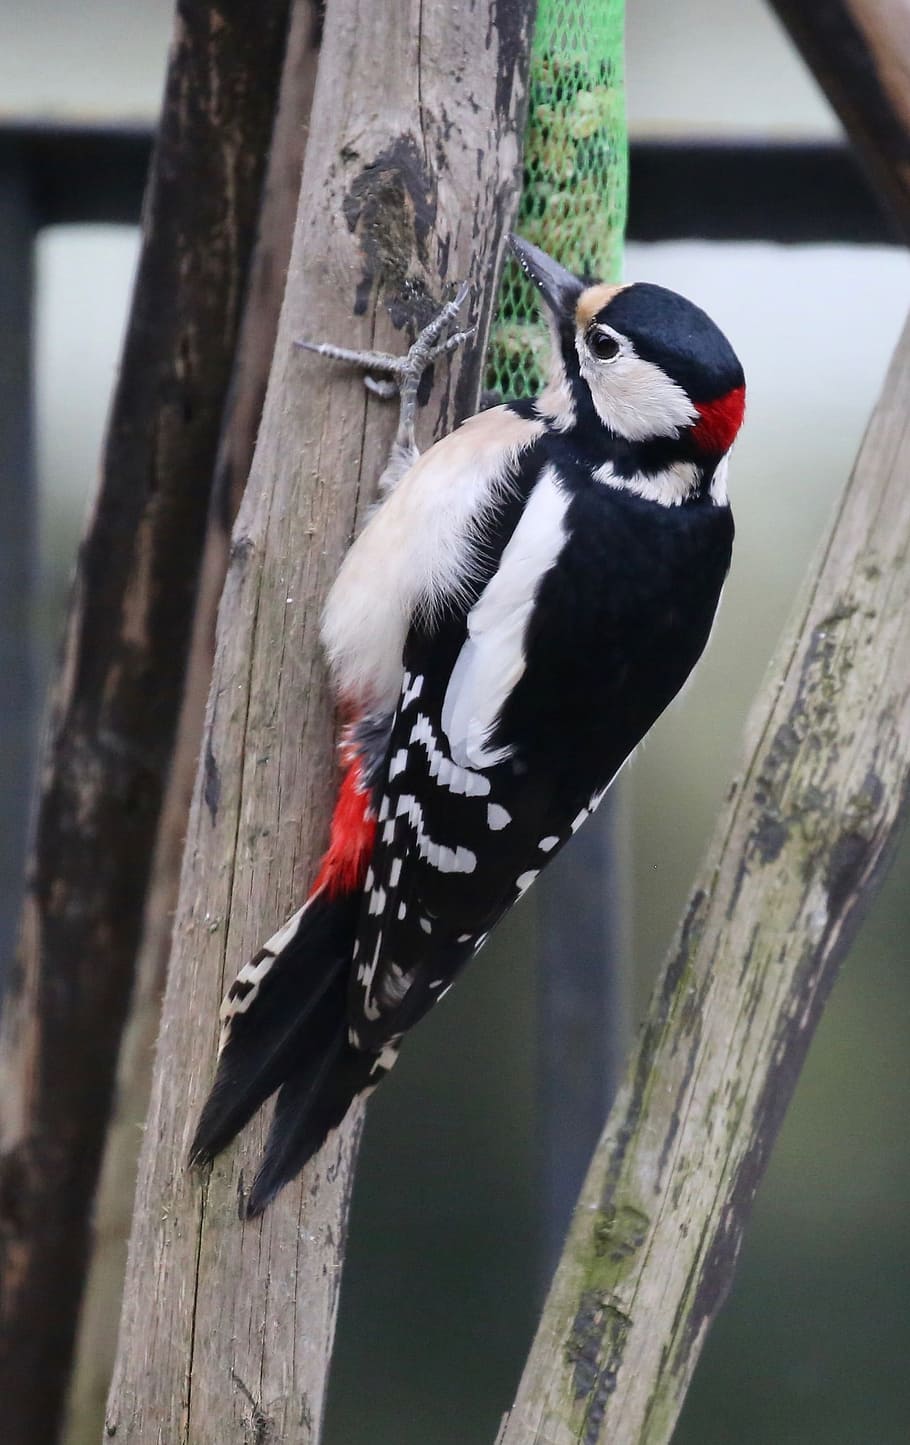 Nature, Animals, Birds, great spotted woodpecker, animal world, bird, animal wildlife, one animal, animals in the wild, animal themes